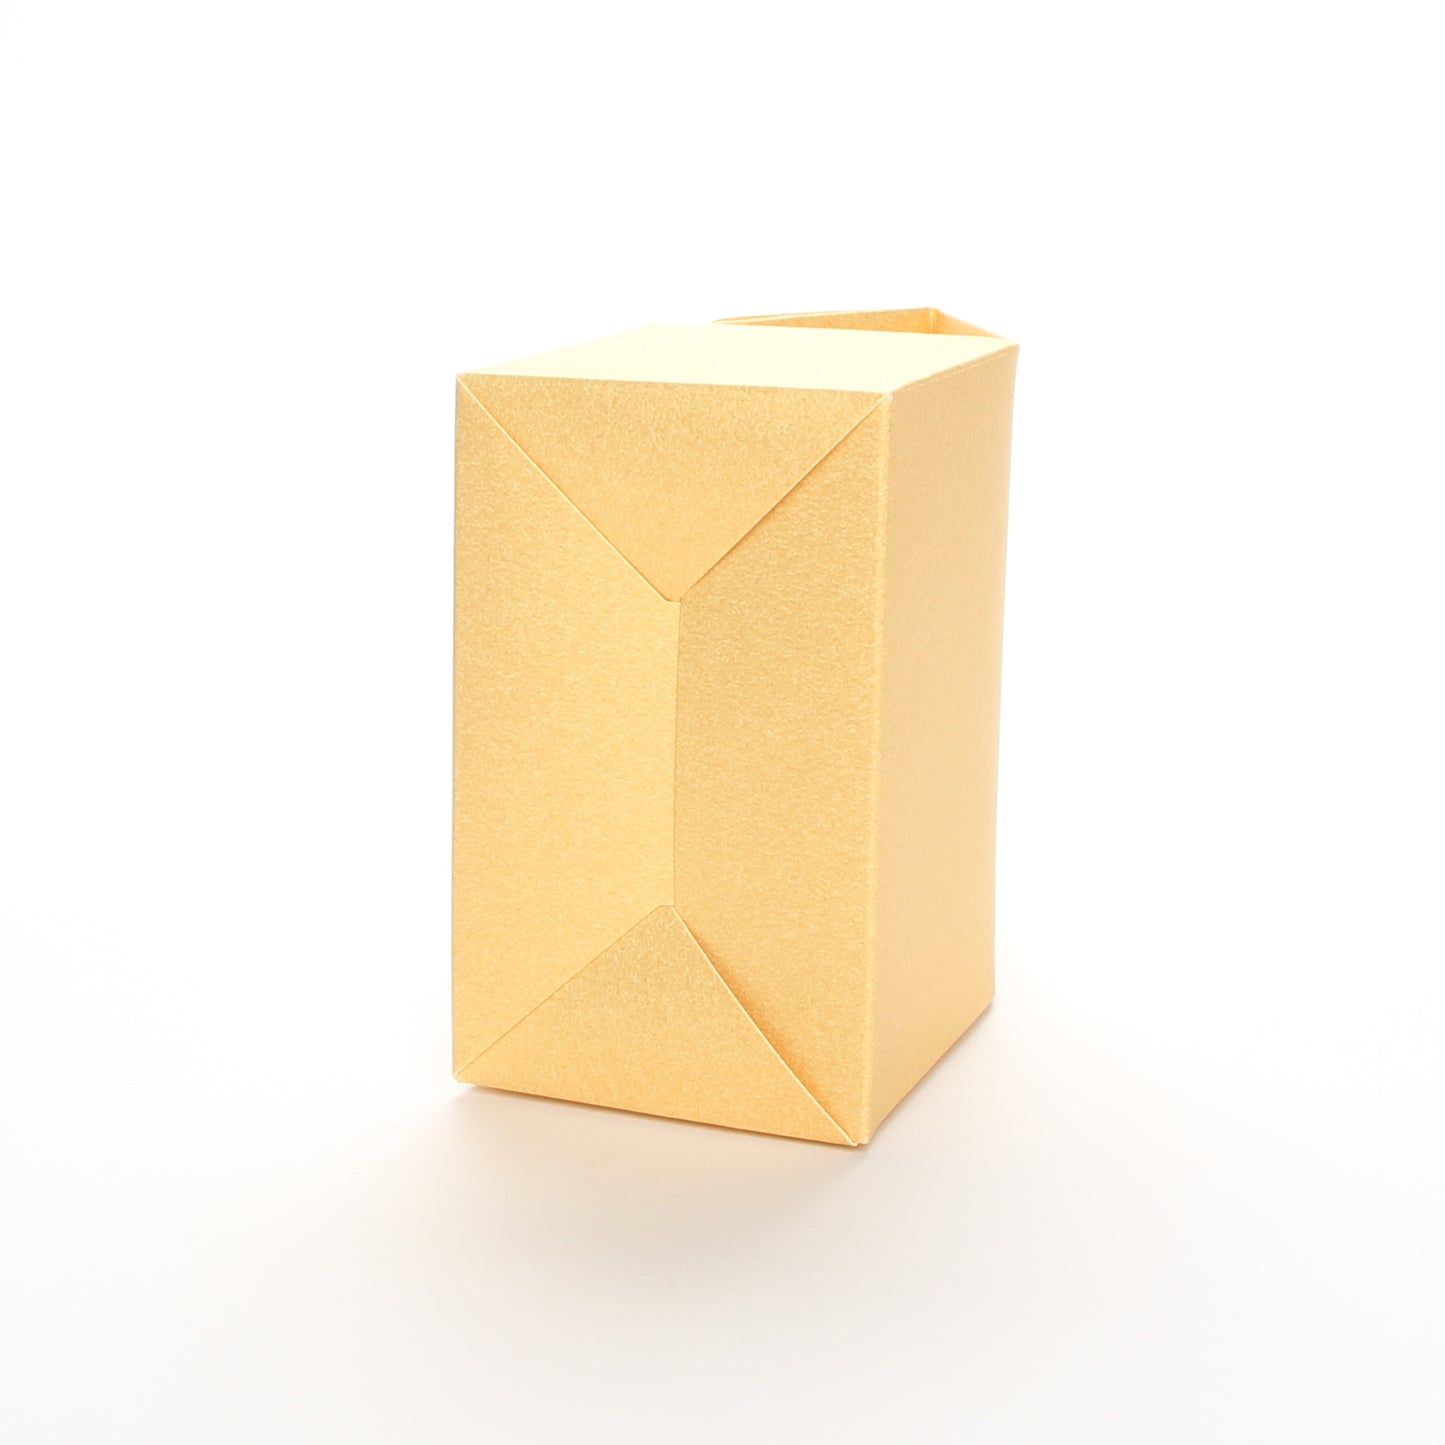 Bottom view of Lux Party’s gold favor box on a white background.